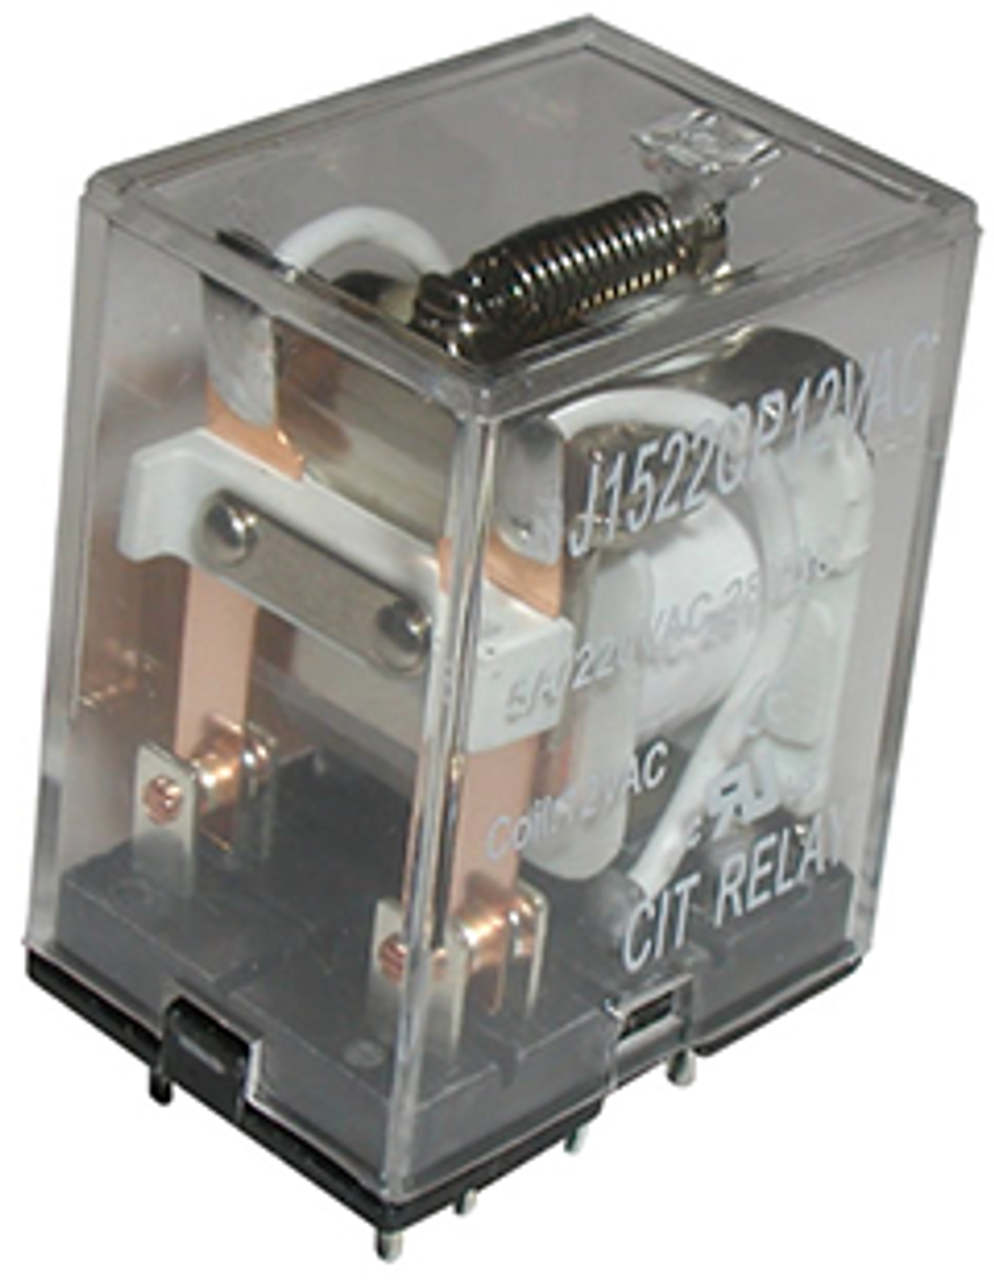 CIT Relay and Switch J1522CT220VACT Industrial Relays